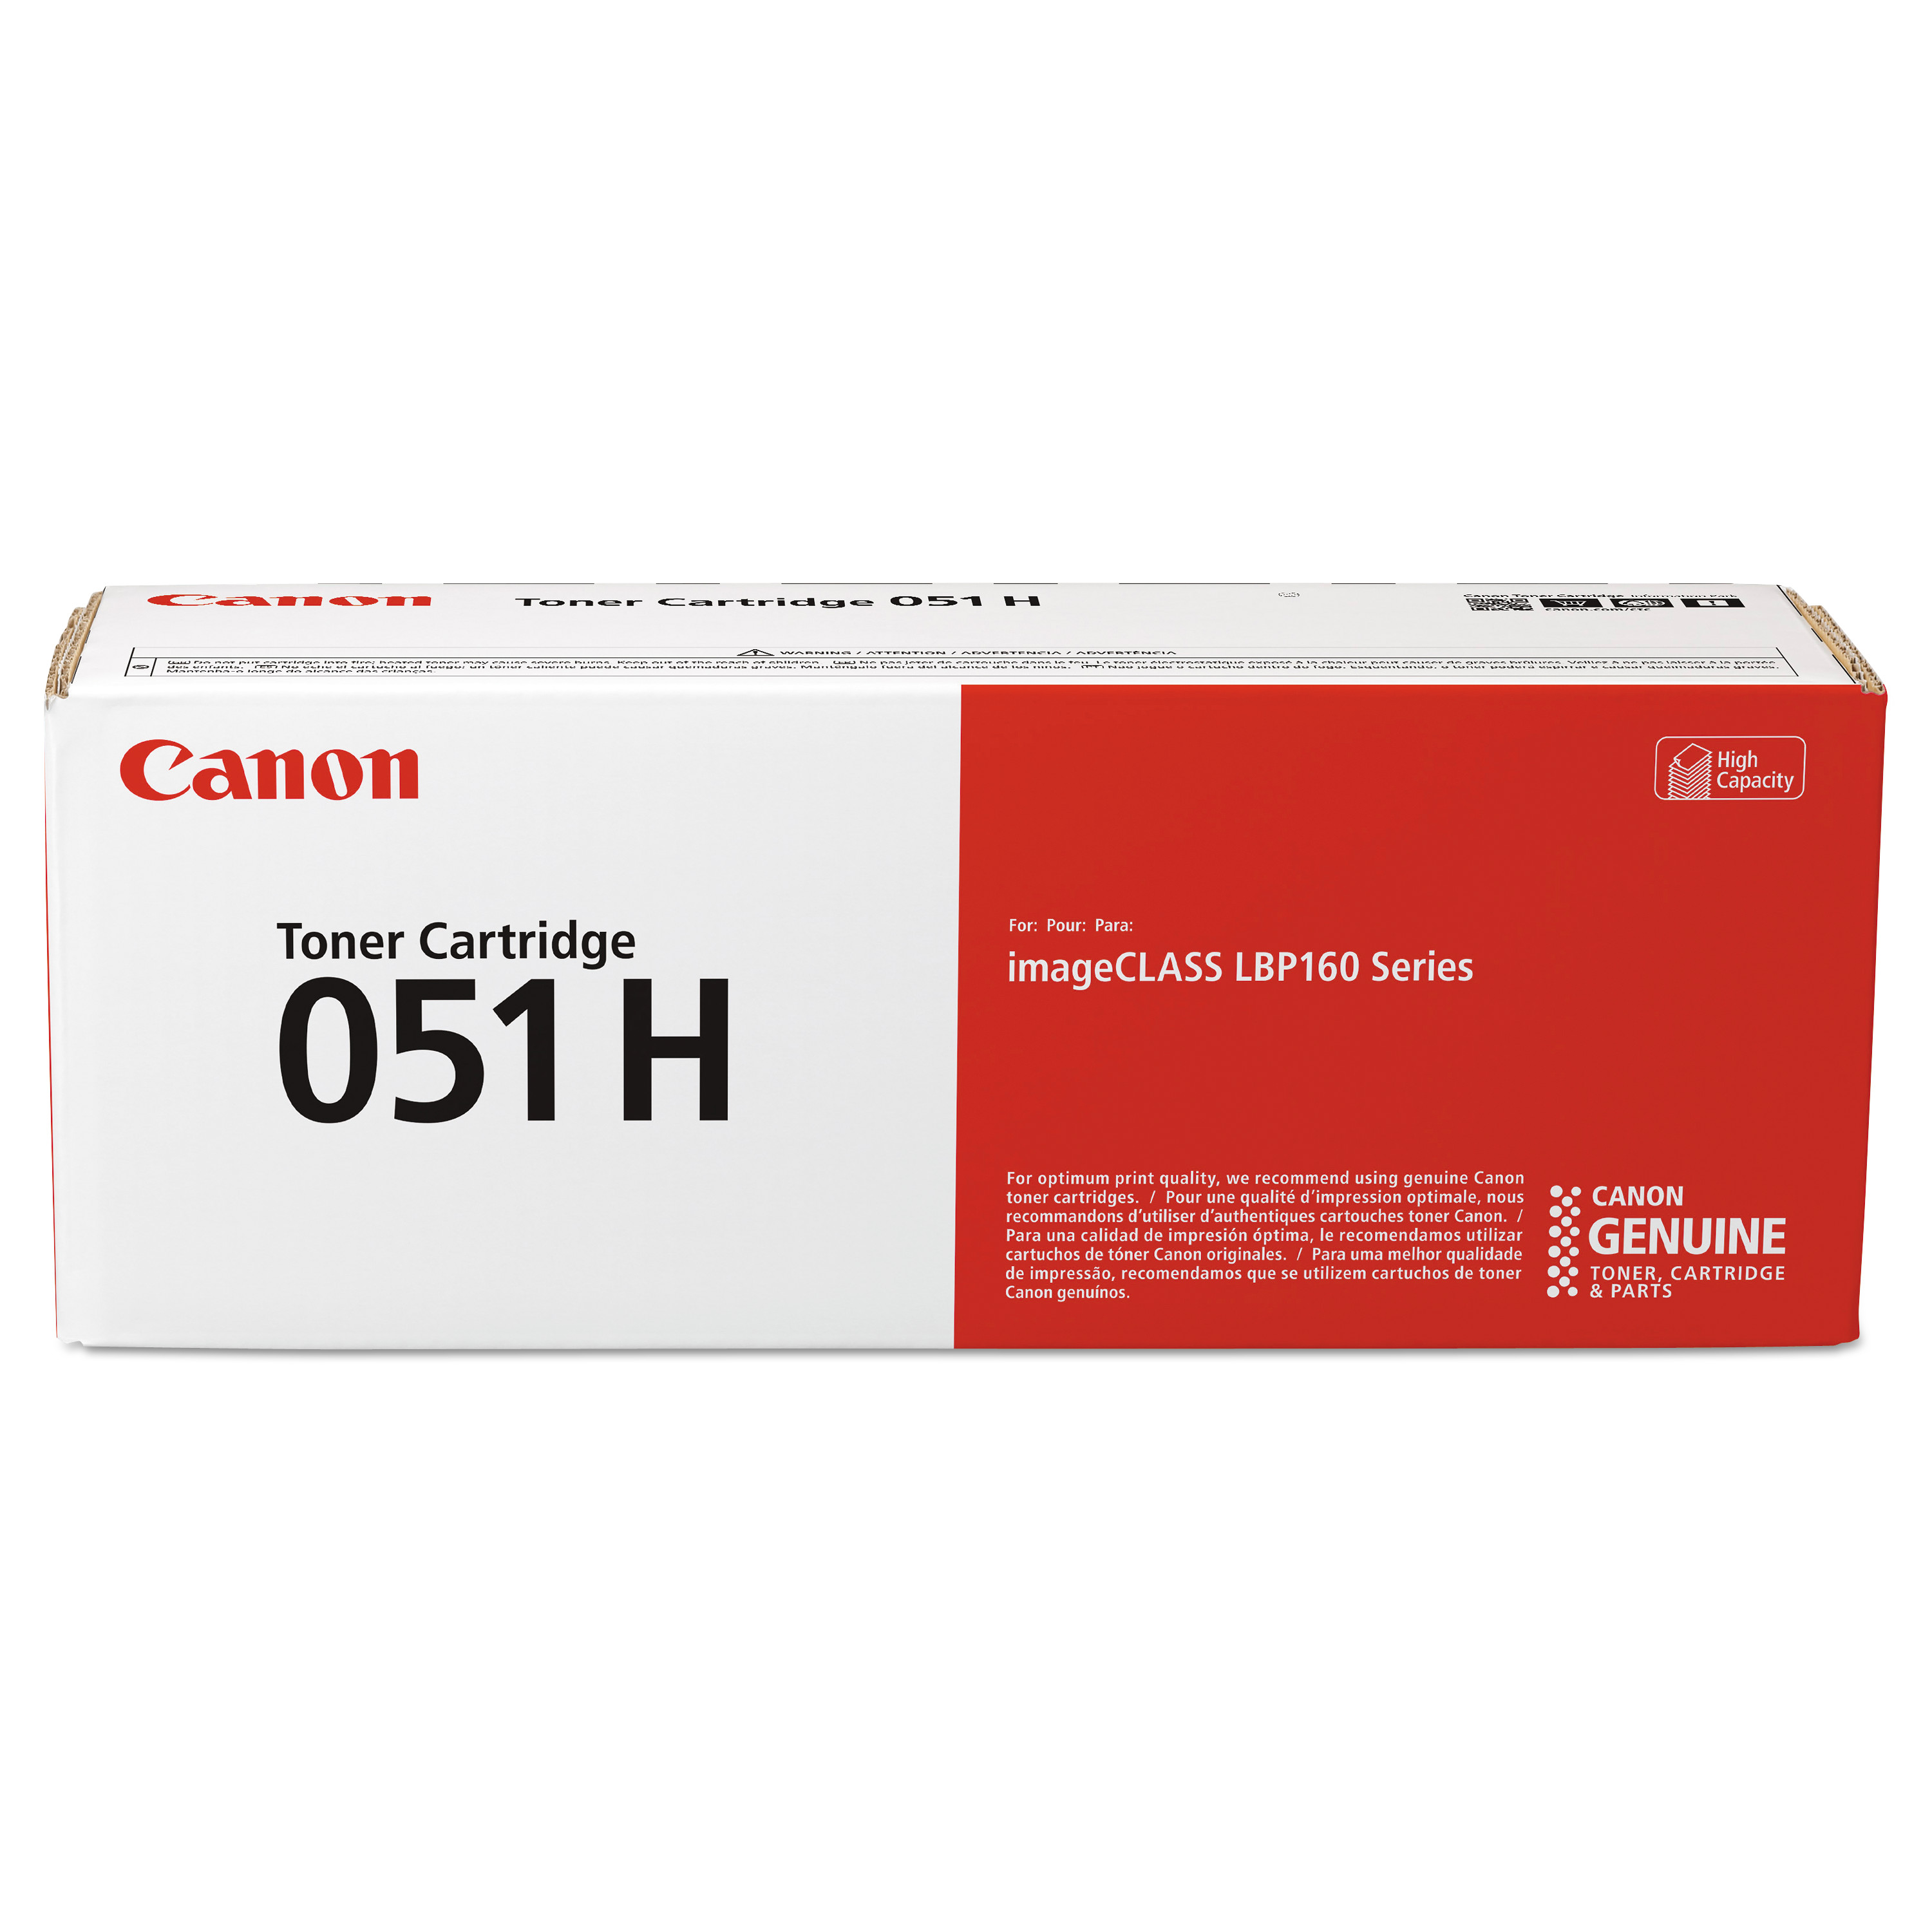  Canon 2169C001 2169C001 (051H) High-Yield Toner, 4100 Page-Yield, Black (CNM2169C001) 